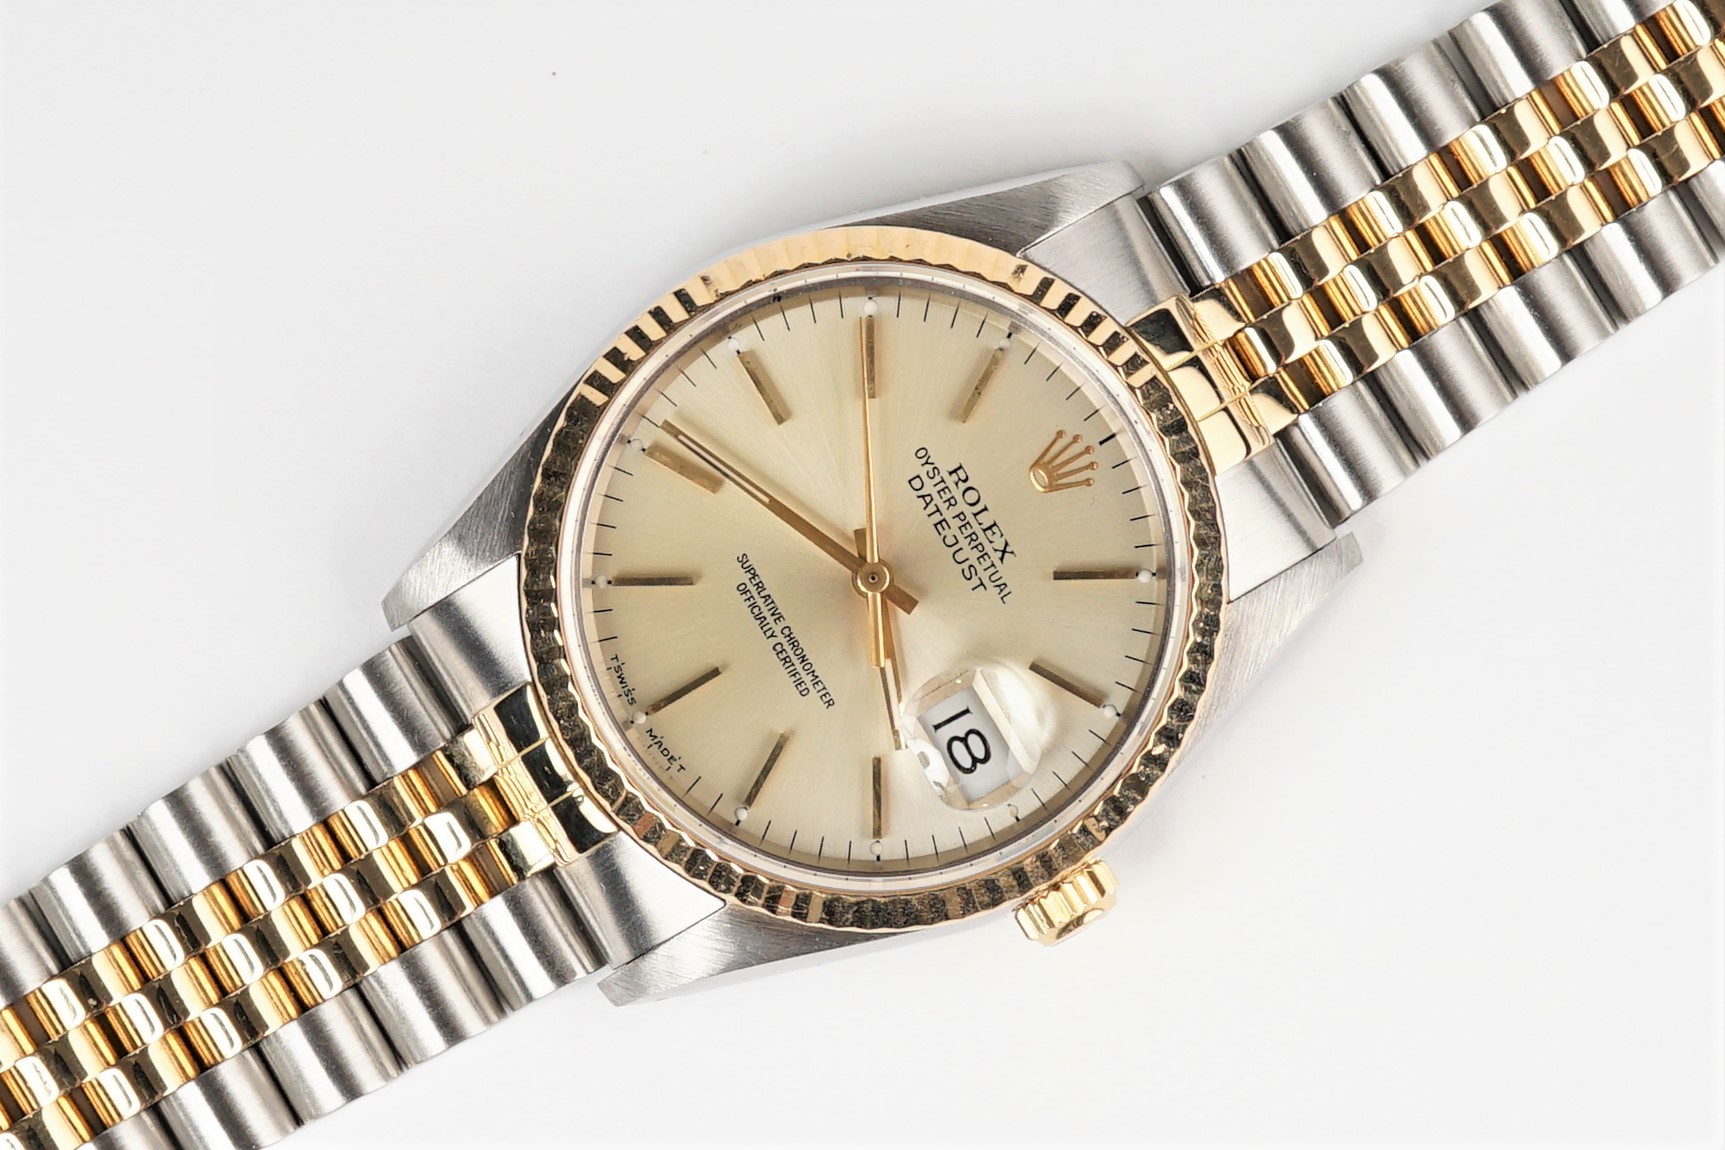 Rolex Oyster Perpetual Datejust 16233 (1991)